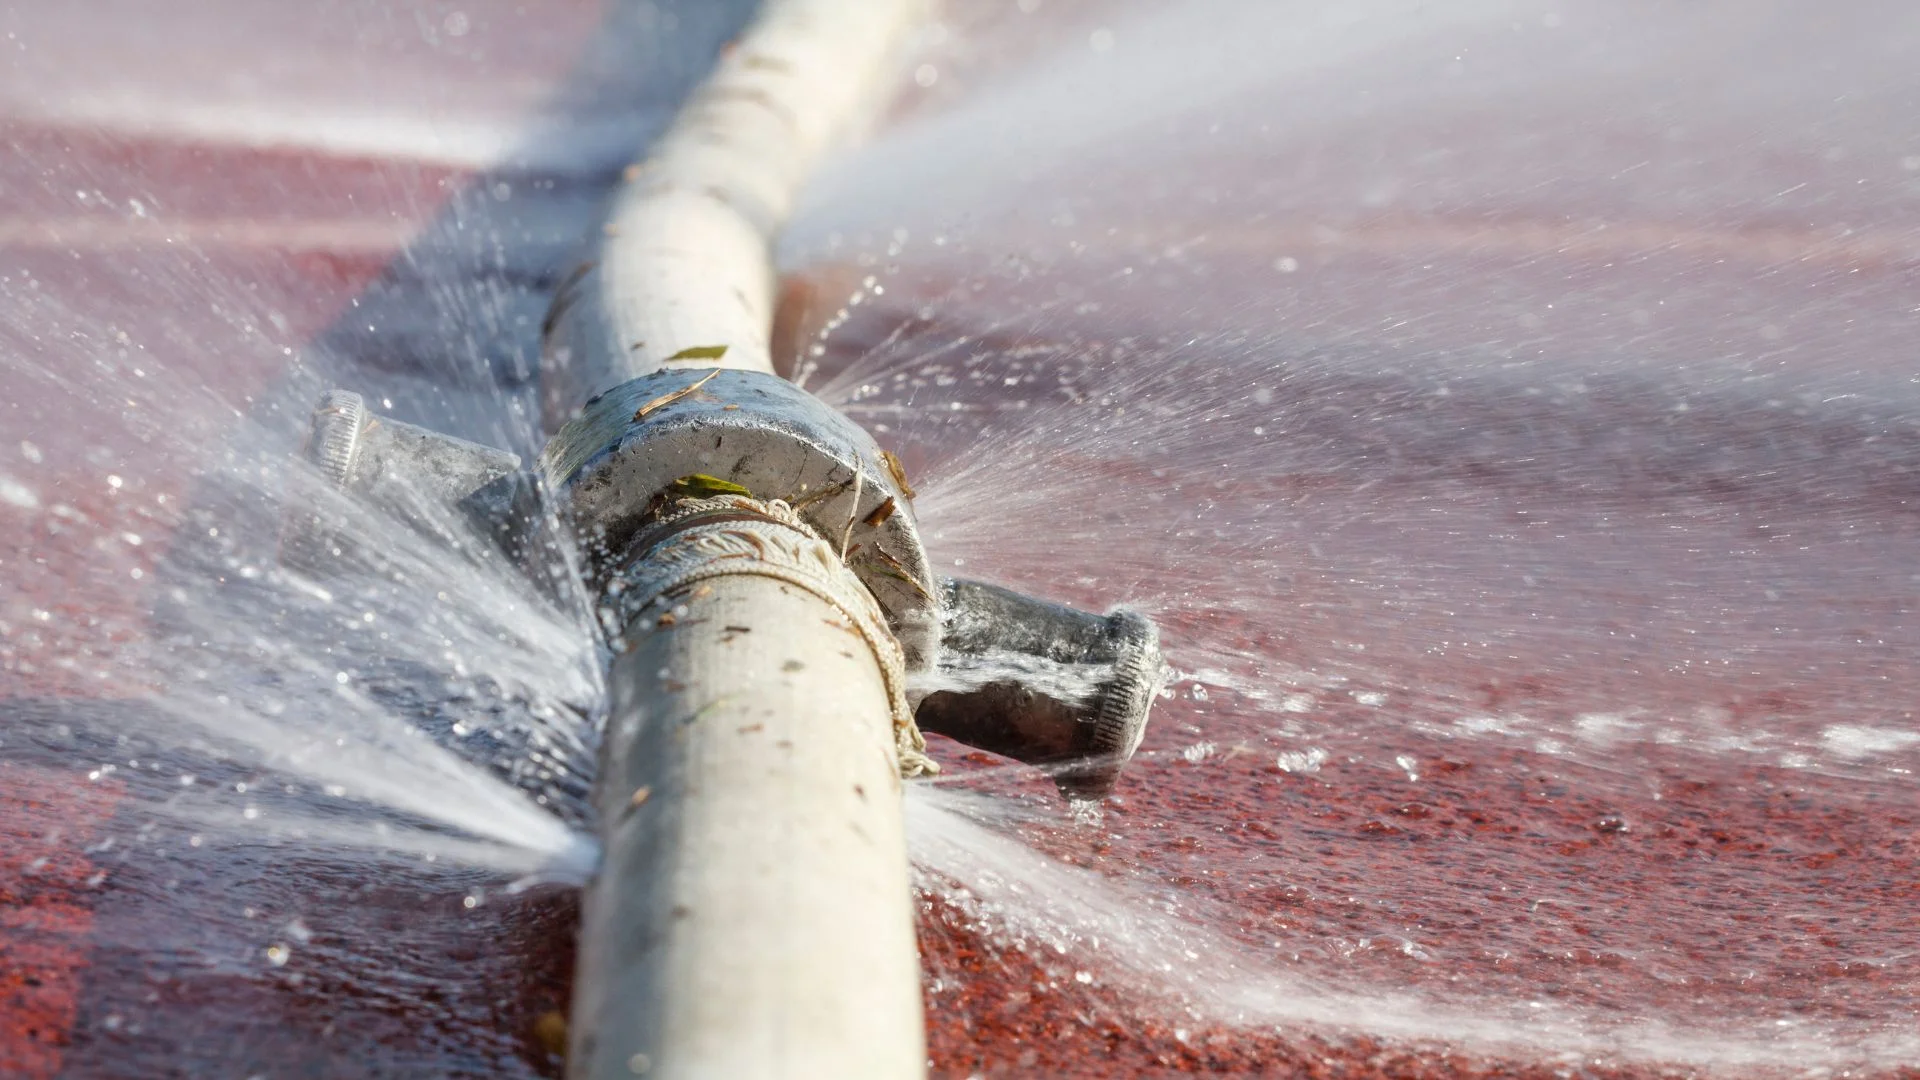 Common Causes of Pipe and Drain Issues